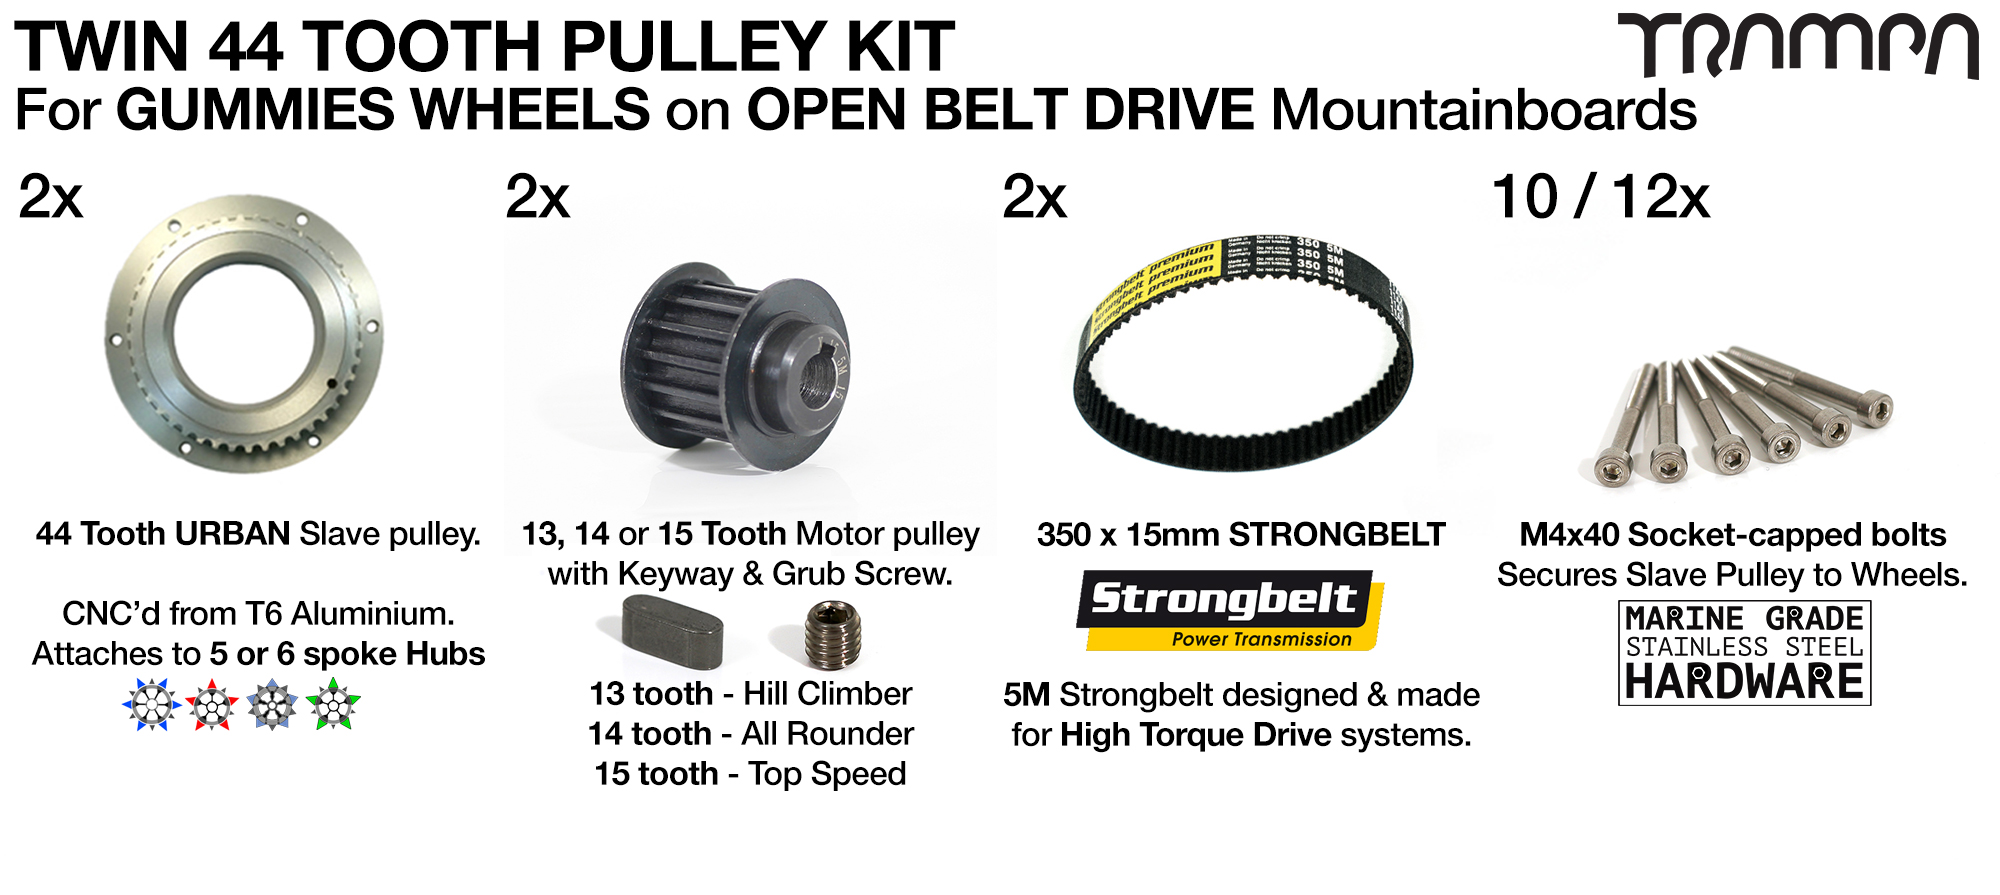 66T Open Belt Drive Pulley Kit with 350mm x 15mm Belt for 5 Inch GUMMIES Wheels using 44 Tooth Slave - TWIN